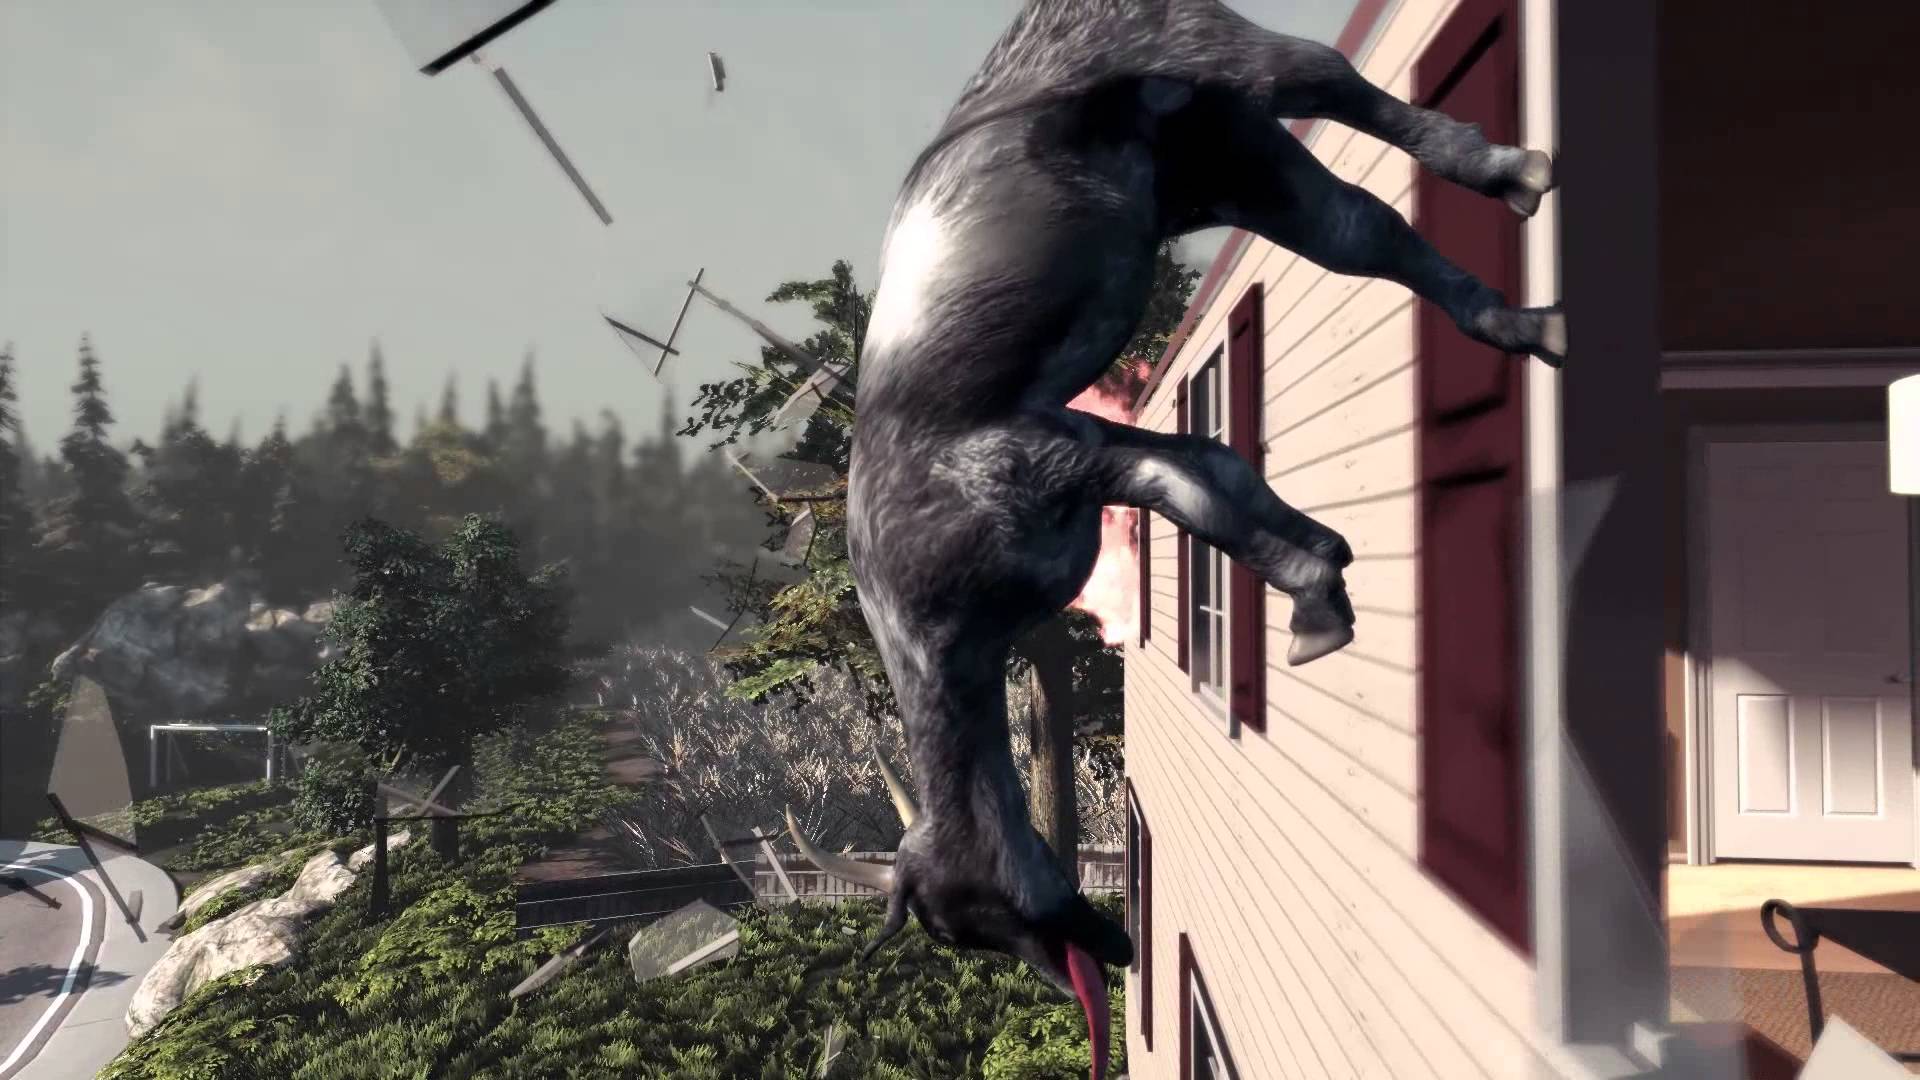 Physical Release of “Goat Simulator” Hitting NA Stores - Deep Silver Acquires Distribution Rights From Coffee Stain Studios